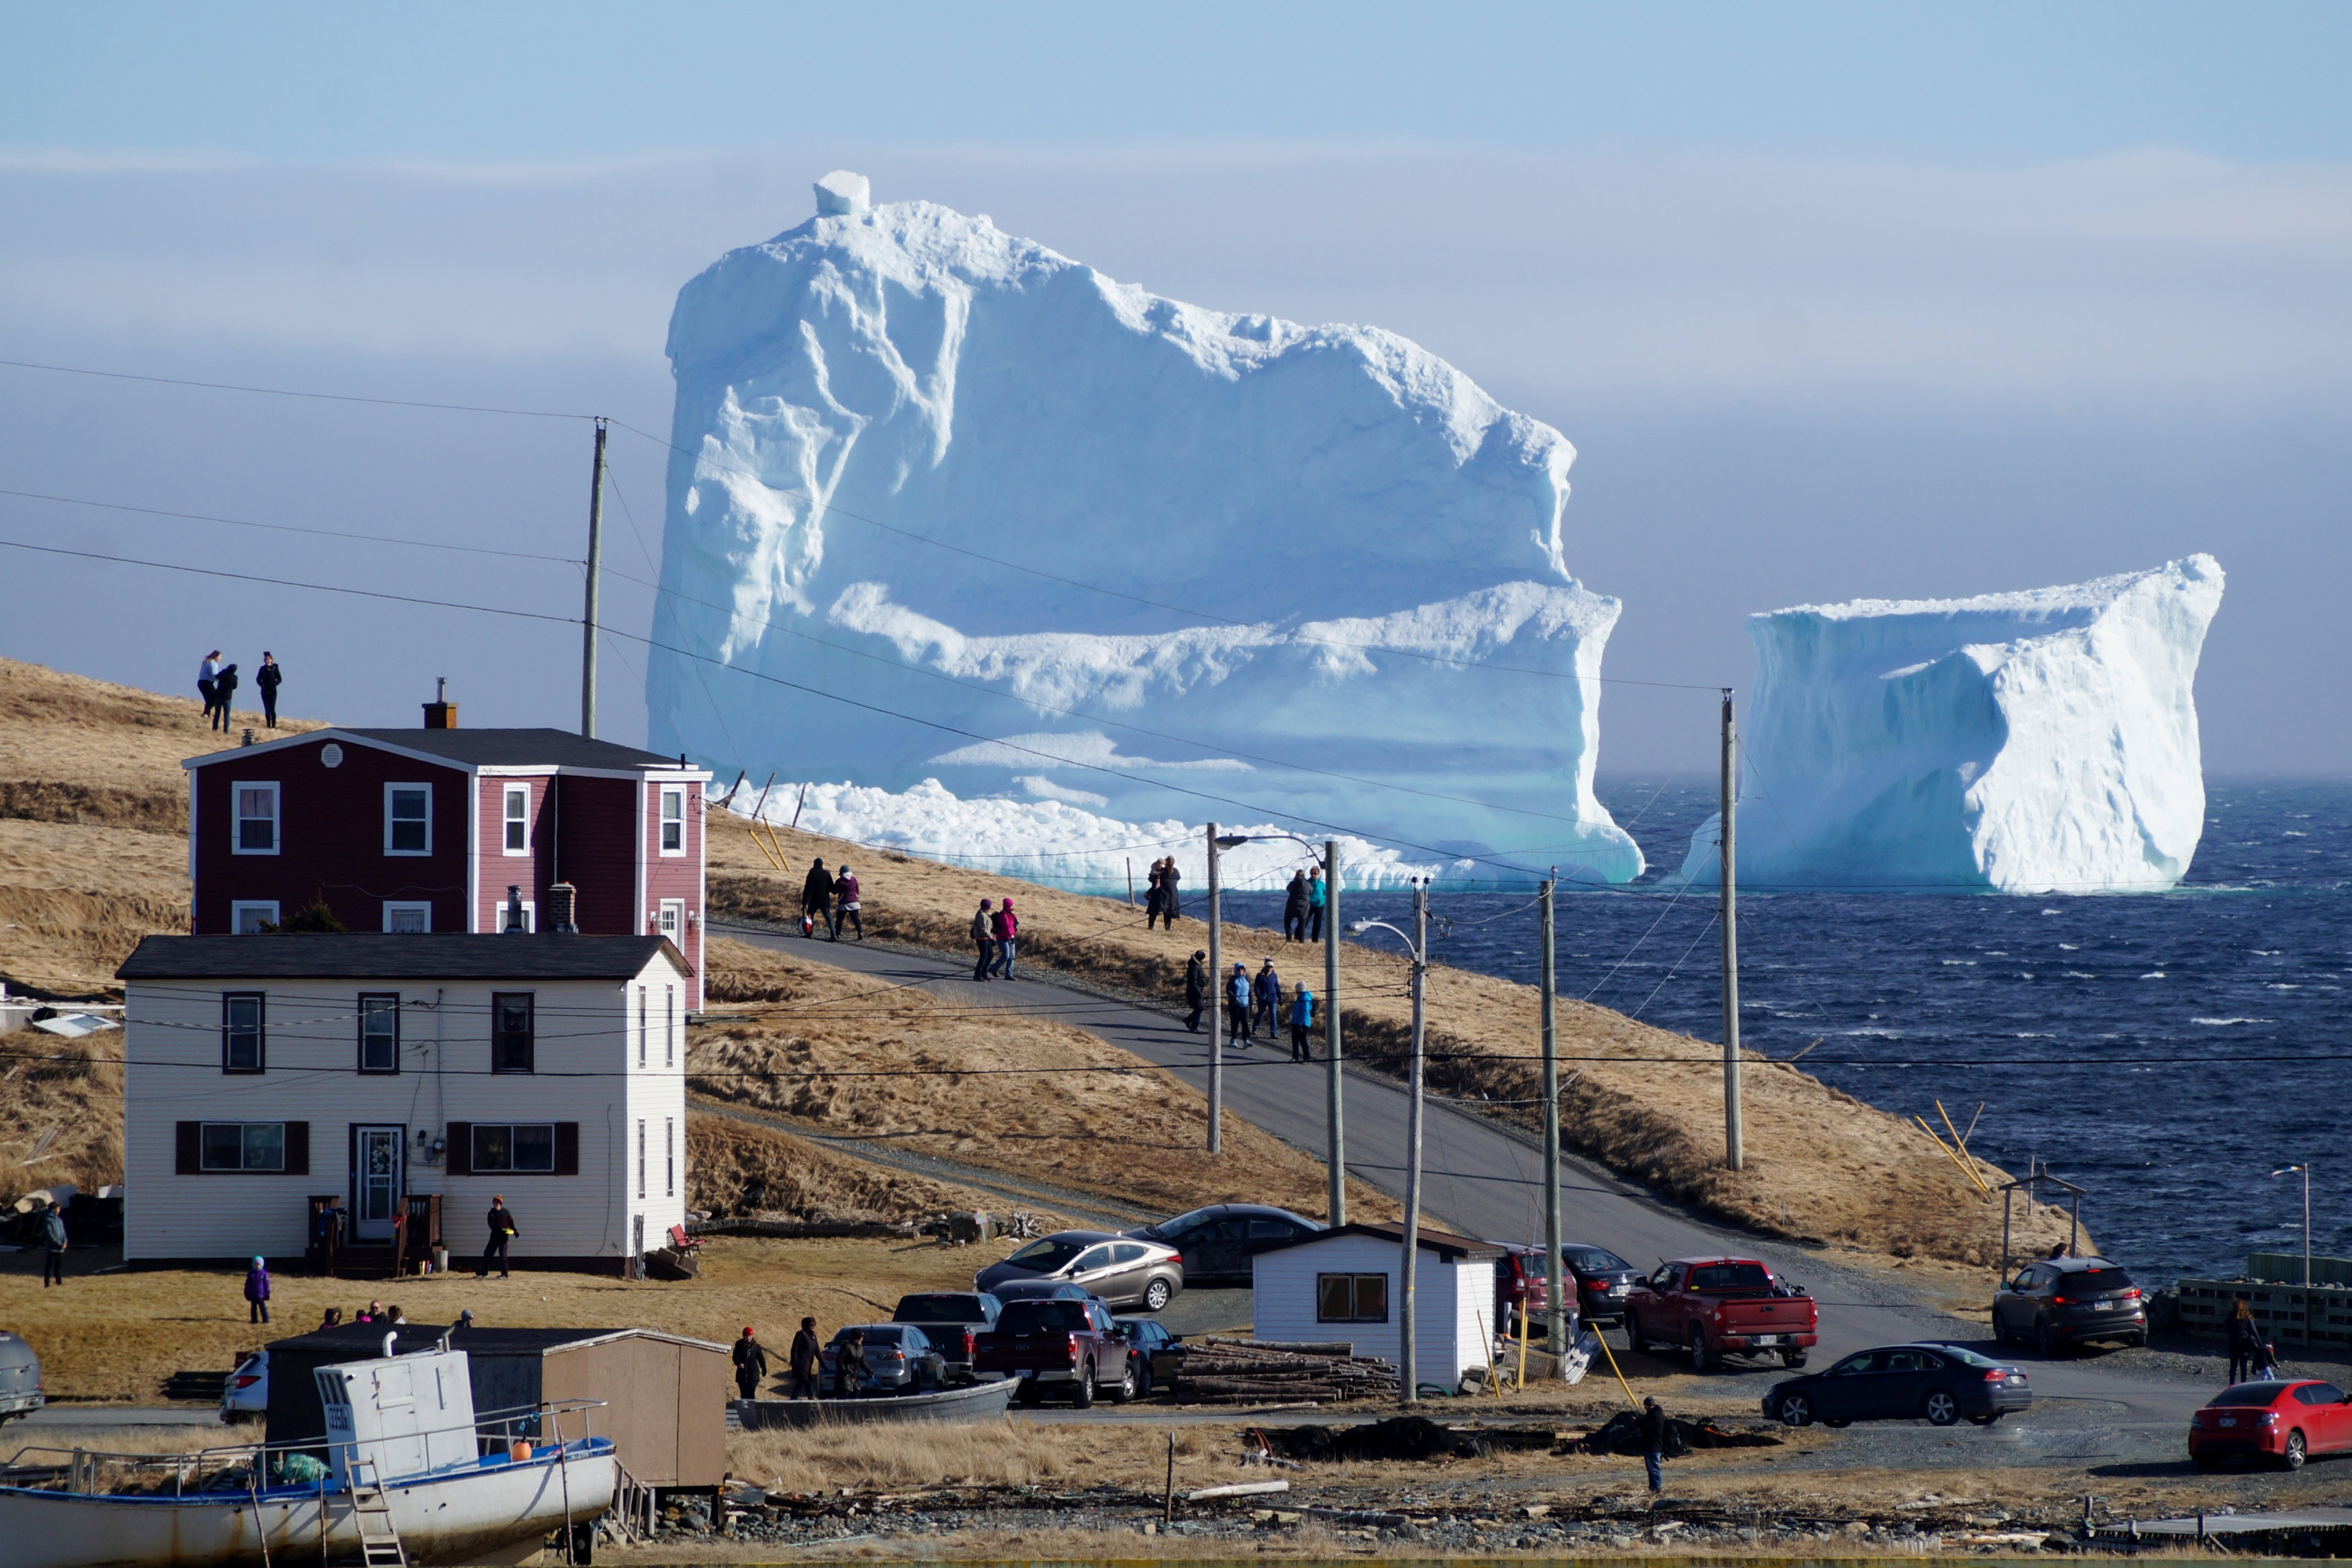 Residents view the first iceberg of the season as it passes the South Shore, also known as "Iceberg Alley", near Ferryland Newfoundland, Canada April 16, 2017. Picture taken April 16, 2017. REUTERS/Jody Martin